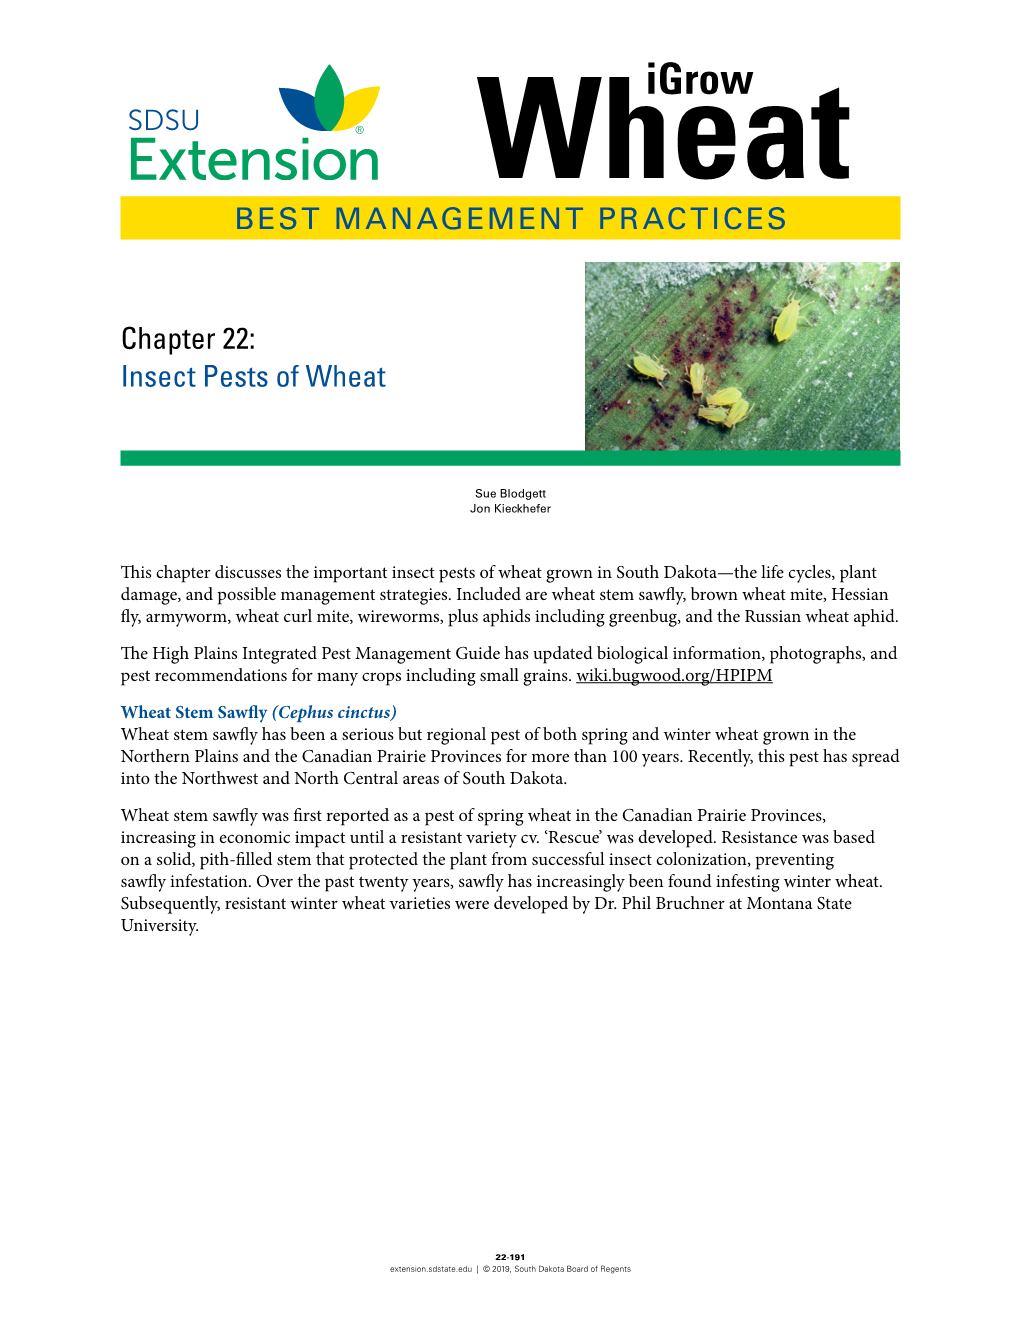 Chapter 22: Insect Pests of Wheat